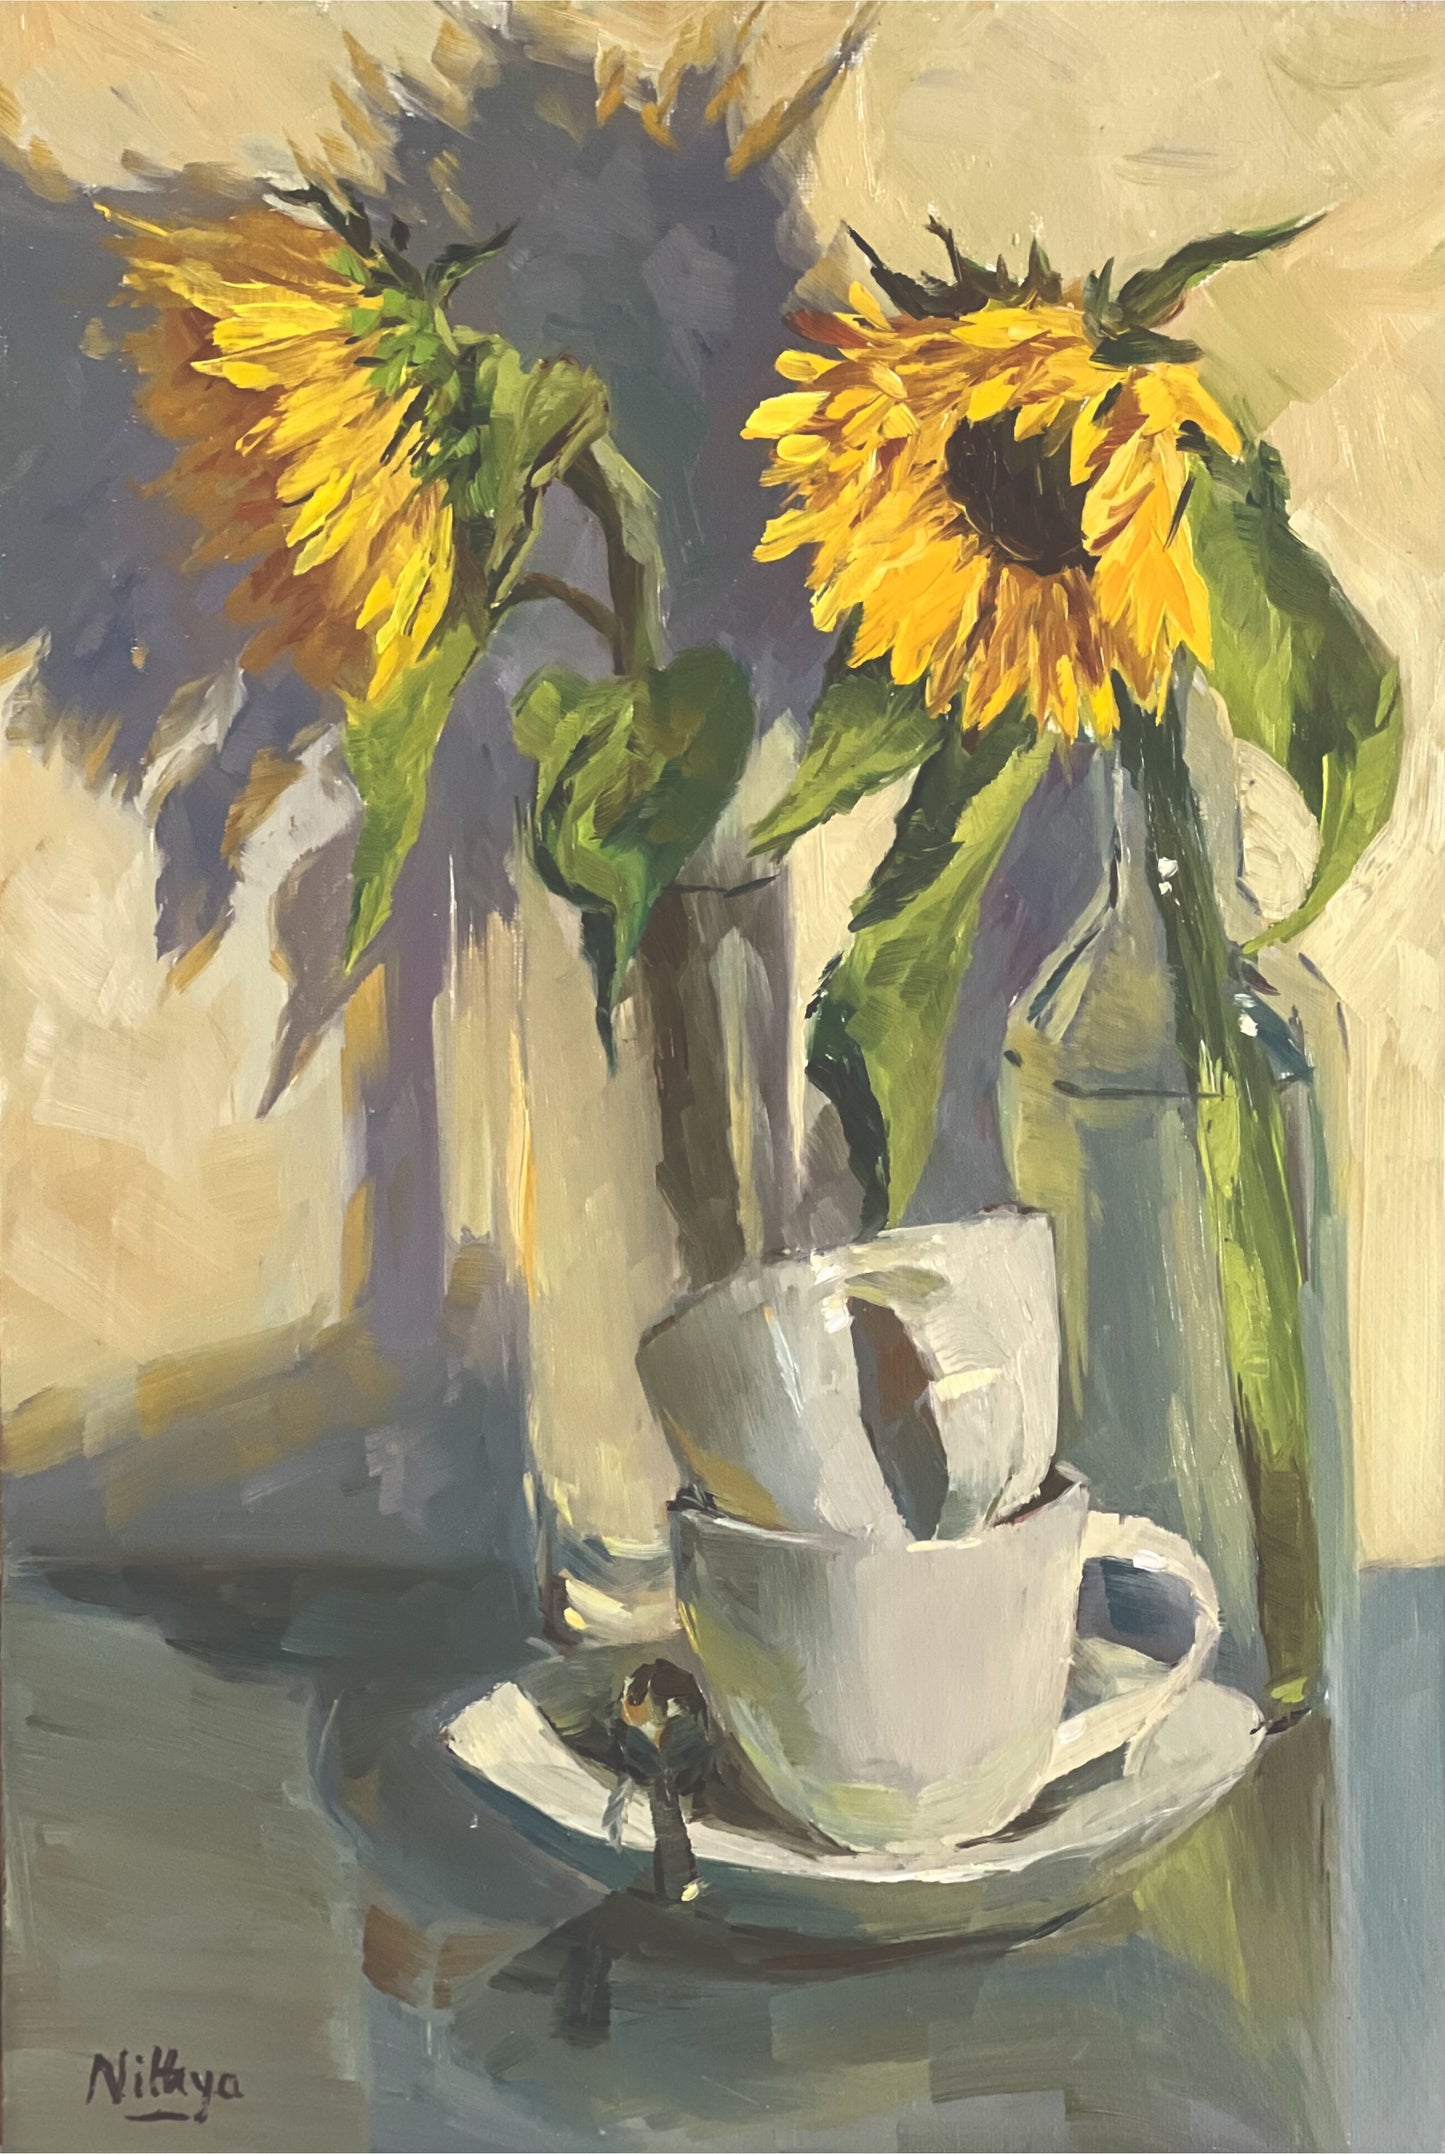 Sunflower Series 14 - Original Stilllife Painting, 8 by 12 inches